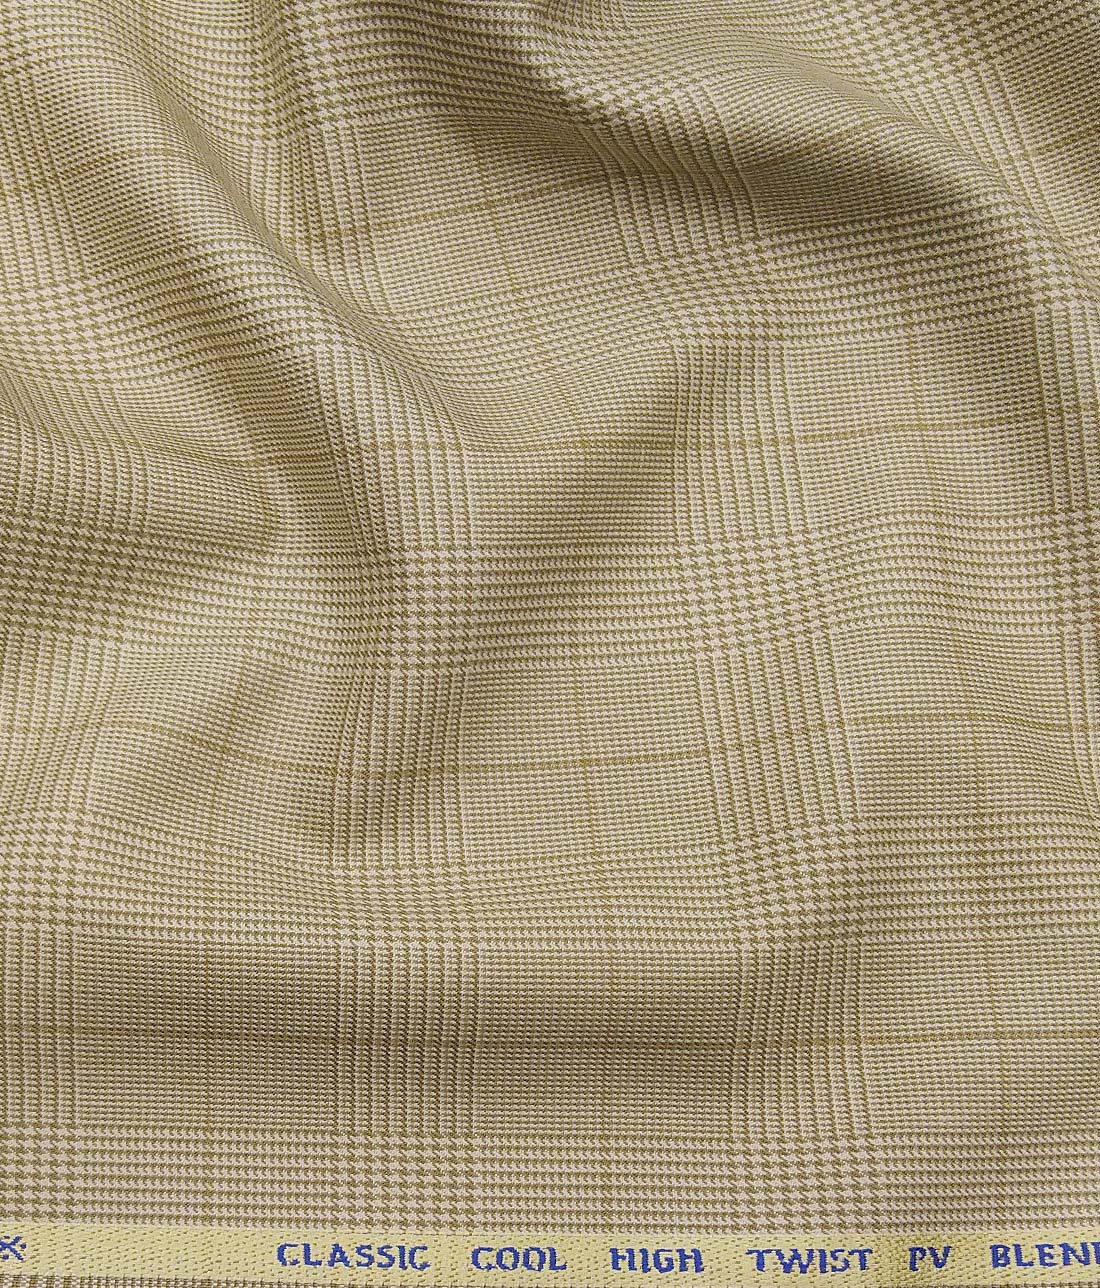 J.Hamsptead by Siyaram's Oat Beige Polyester Viscose Self Broad Checks Unstitched Suiting Fabric